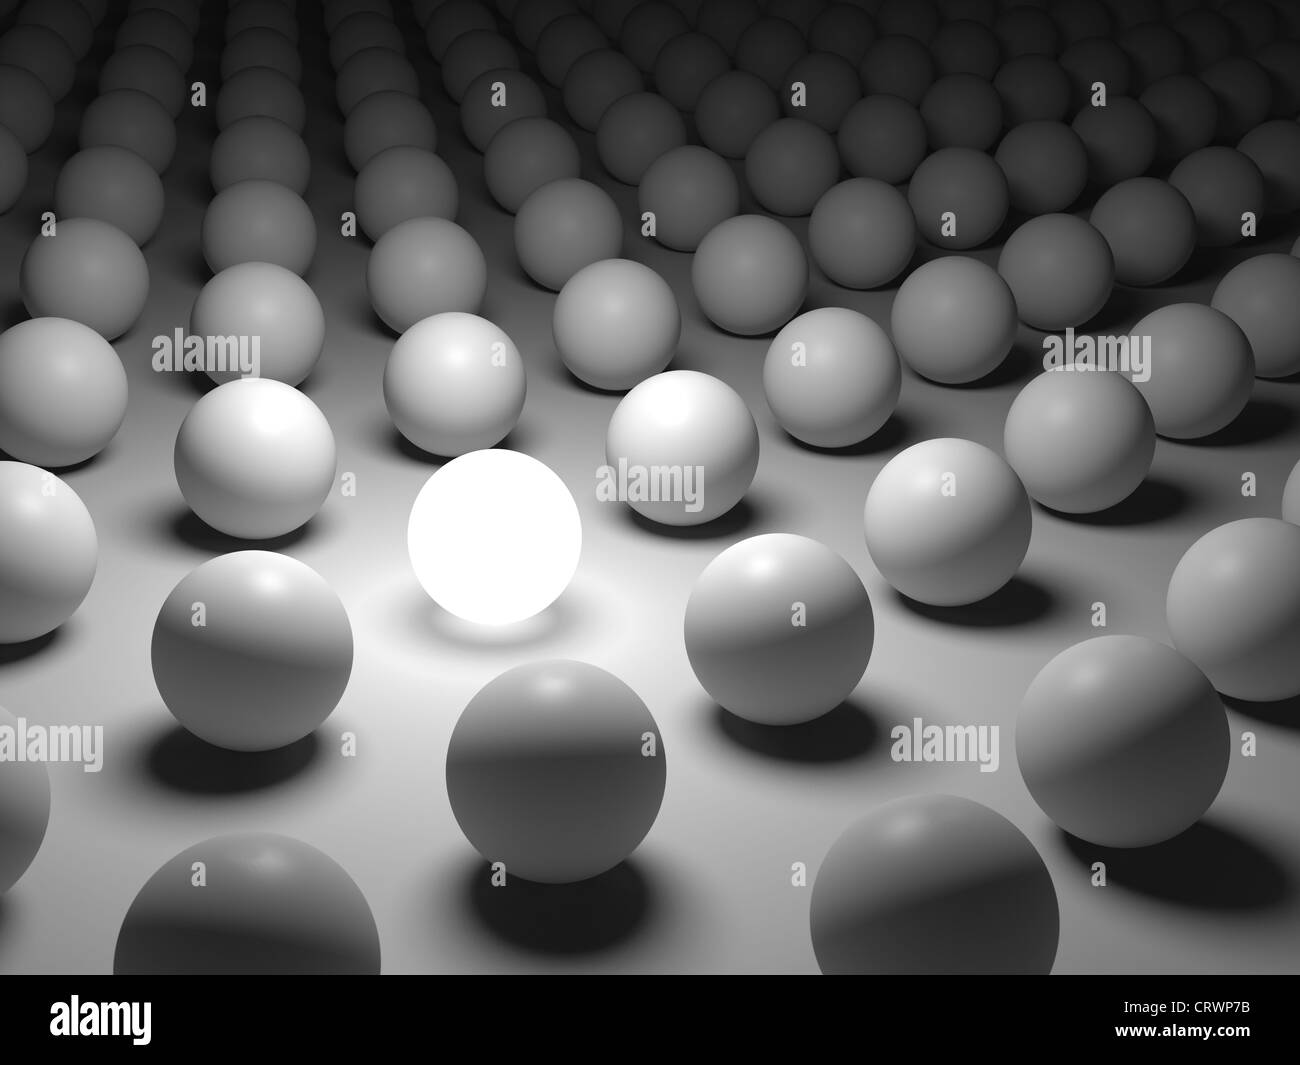 3D concept rendering depicting individualism and uniqueness Stock Photo